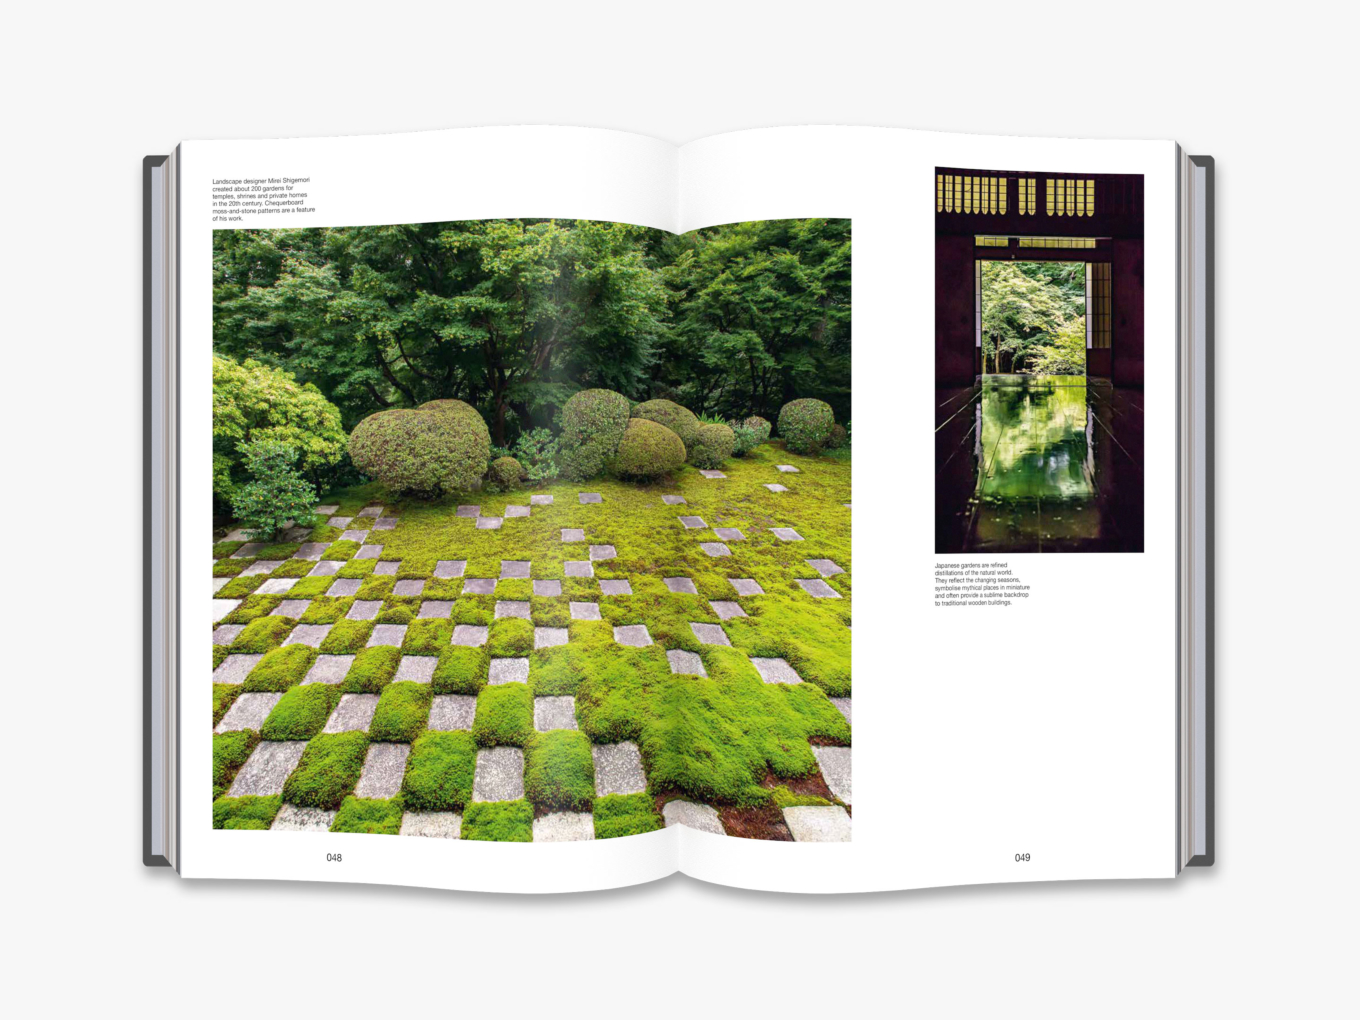 From The Monocle Book of Japan copyright Thames & Hudson Ltd 2020